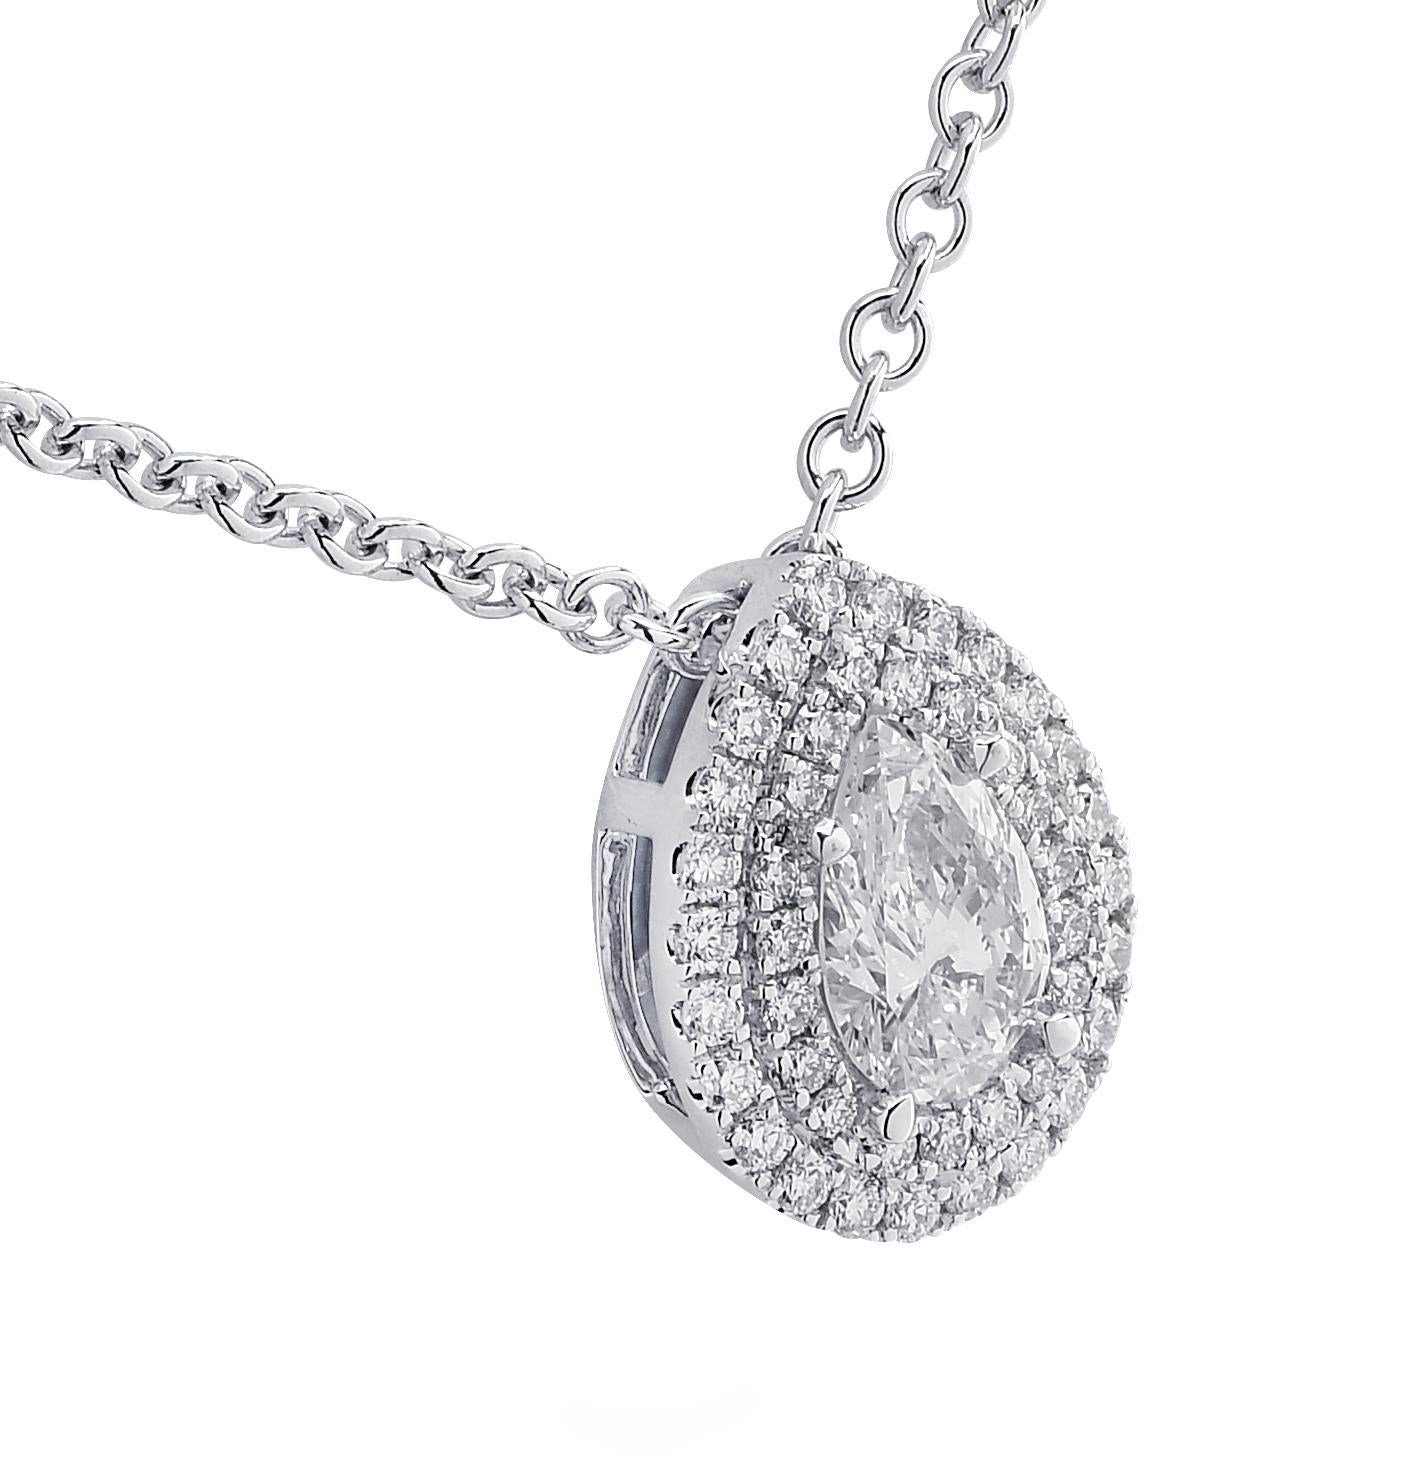 Stunning Vivid Diamonds necklace crafted in 18 karat white gold, showcasing a GIA Certified pear shape diamond weighing 0.59 carats, E color, VS2 clarity, framed with a double halo encrusted with 43 round brilliant cut diamonds weighing 0.26 carats